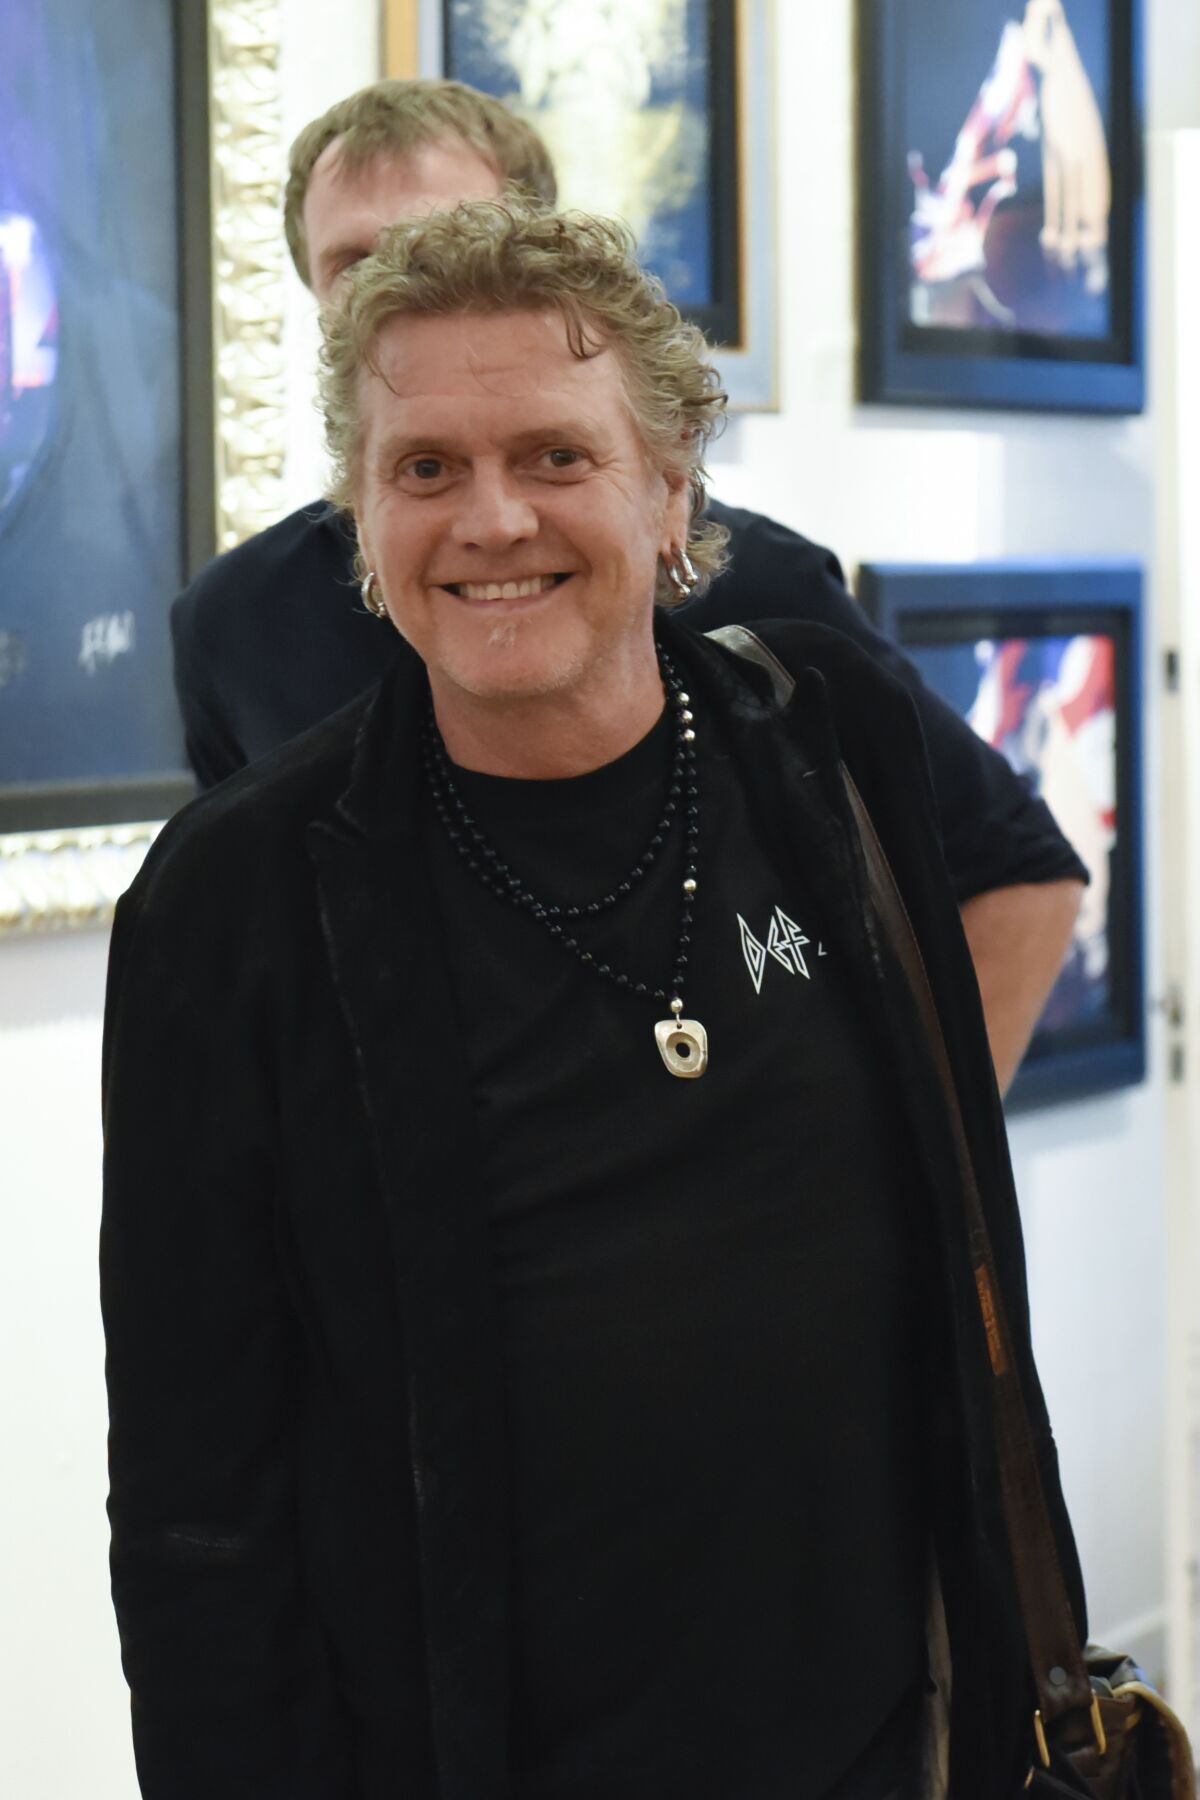 A man with short and curly gray hair wearing a black shirt and jacket and smiling